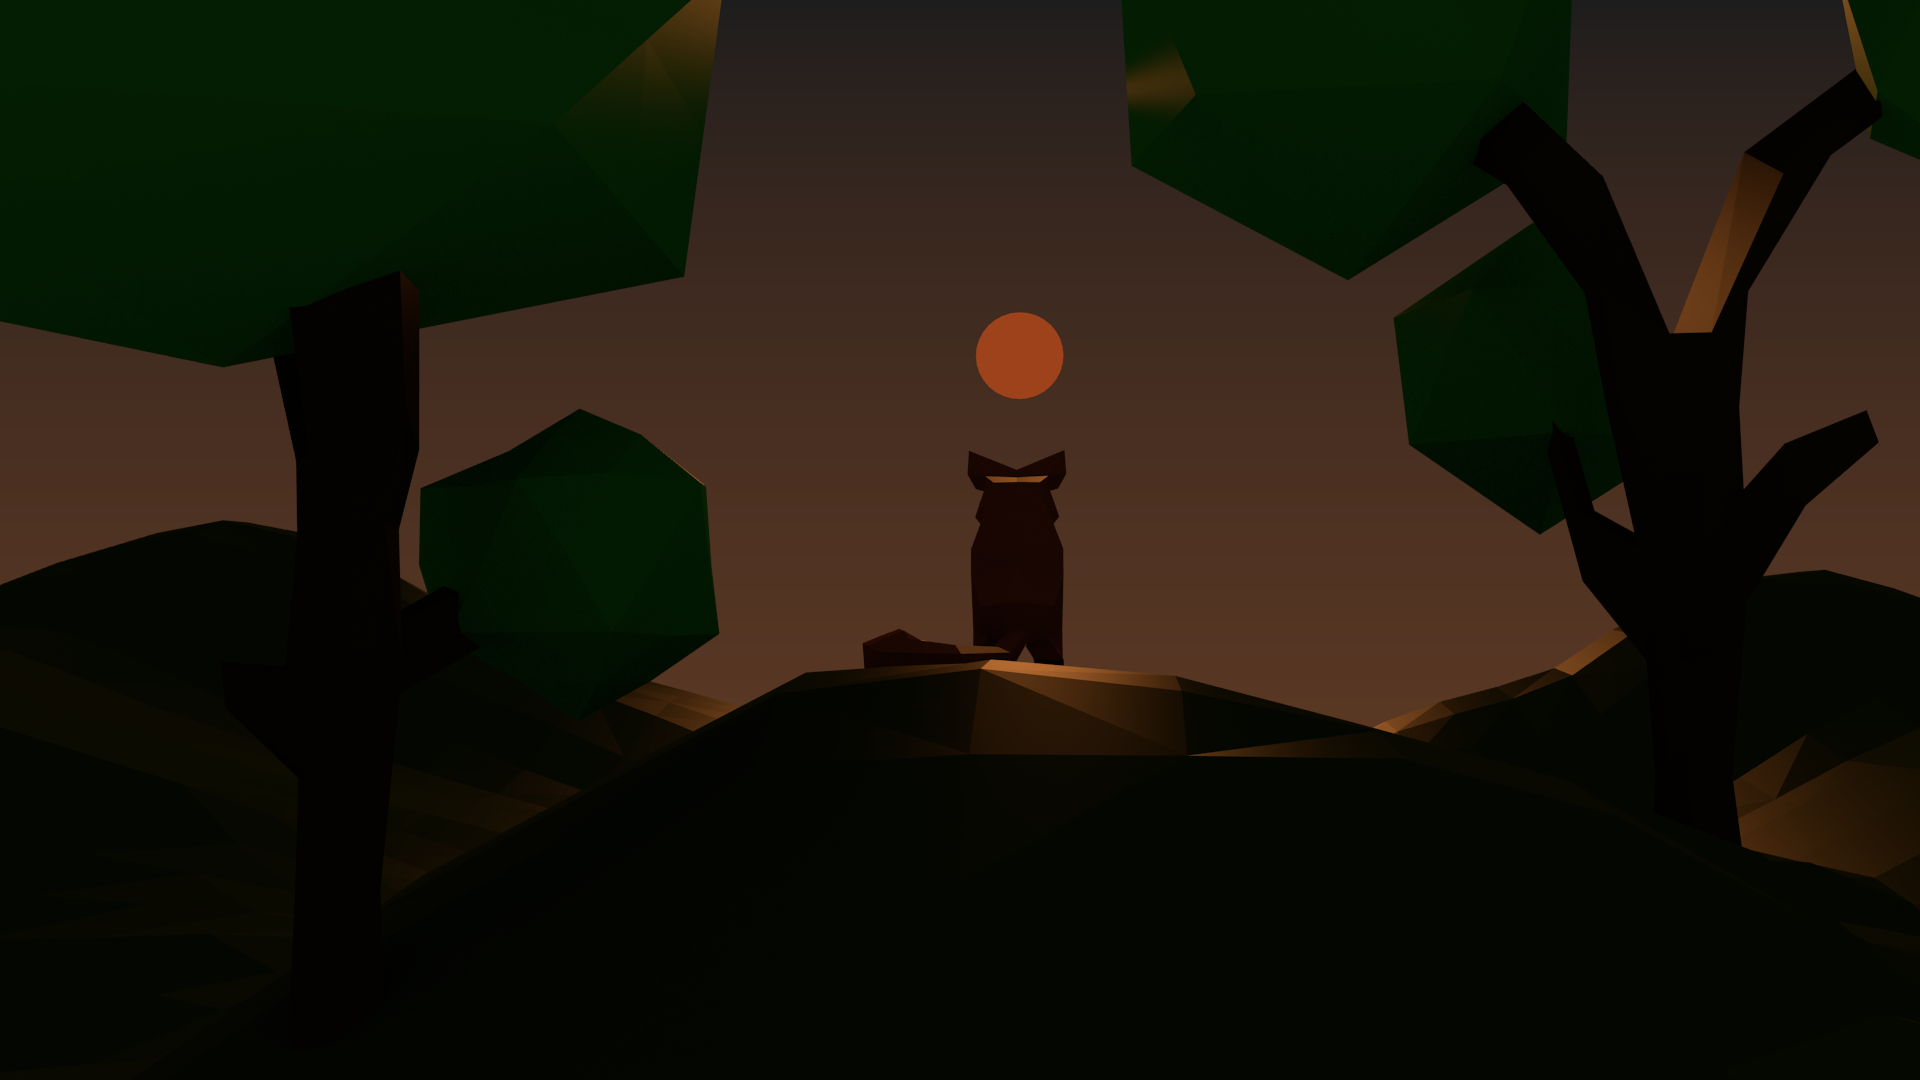 General 1920x1080 fox sunset nature alone low poly CGI